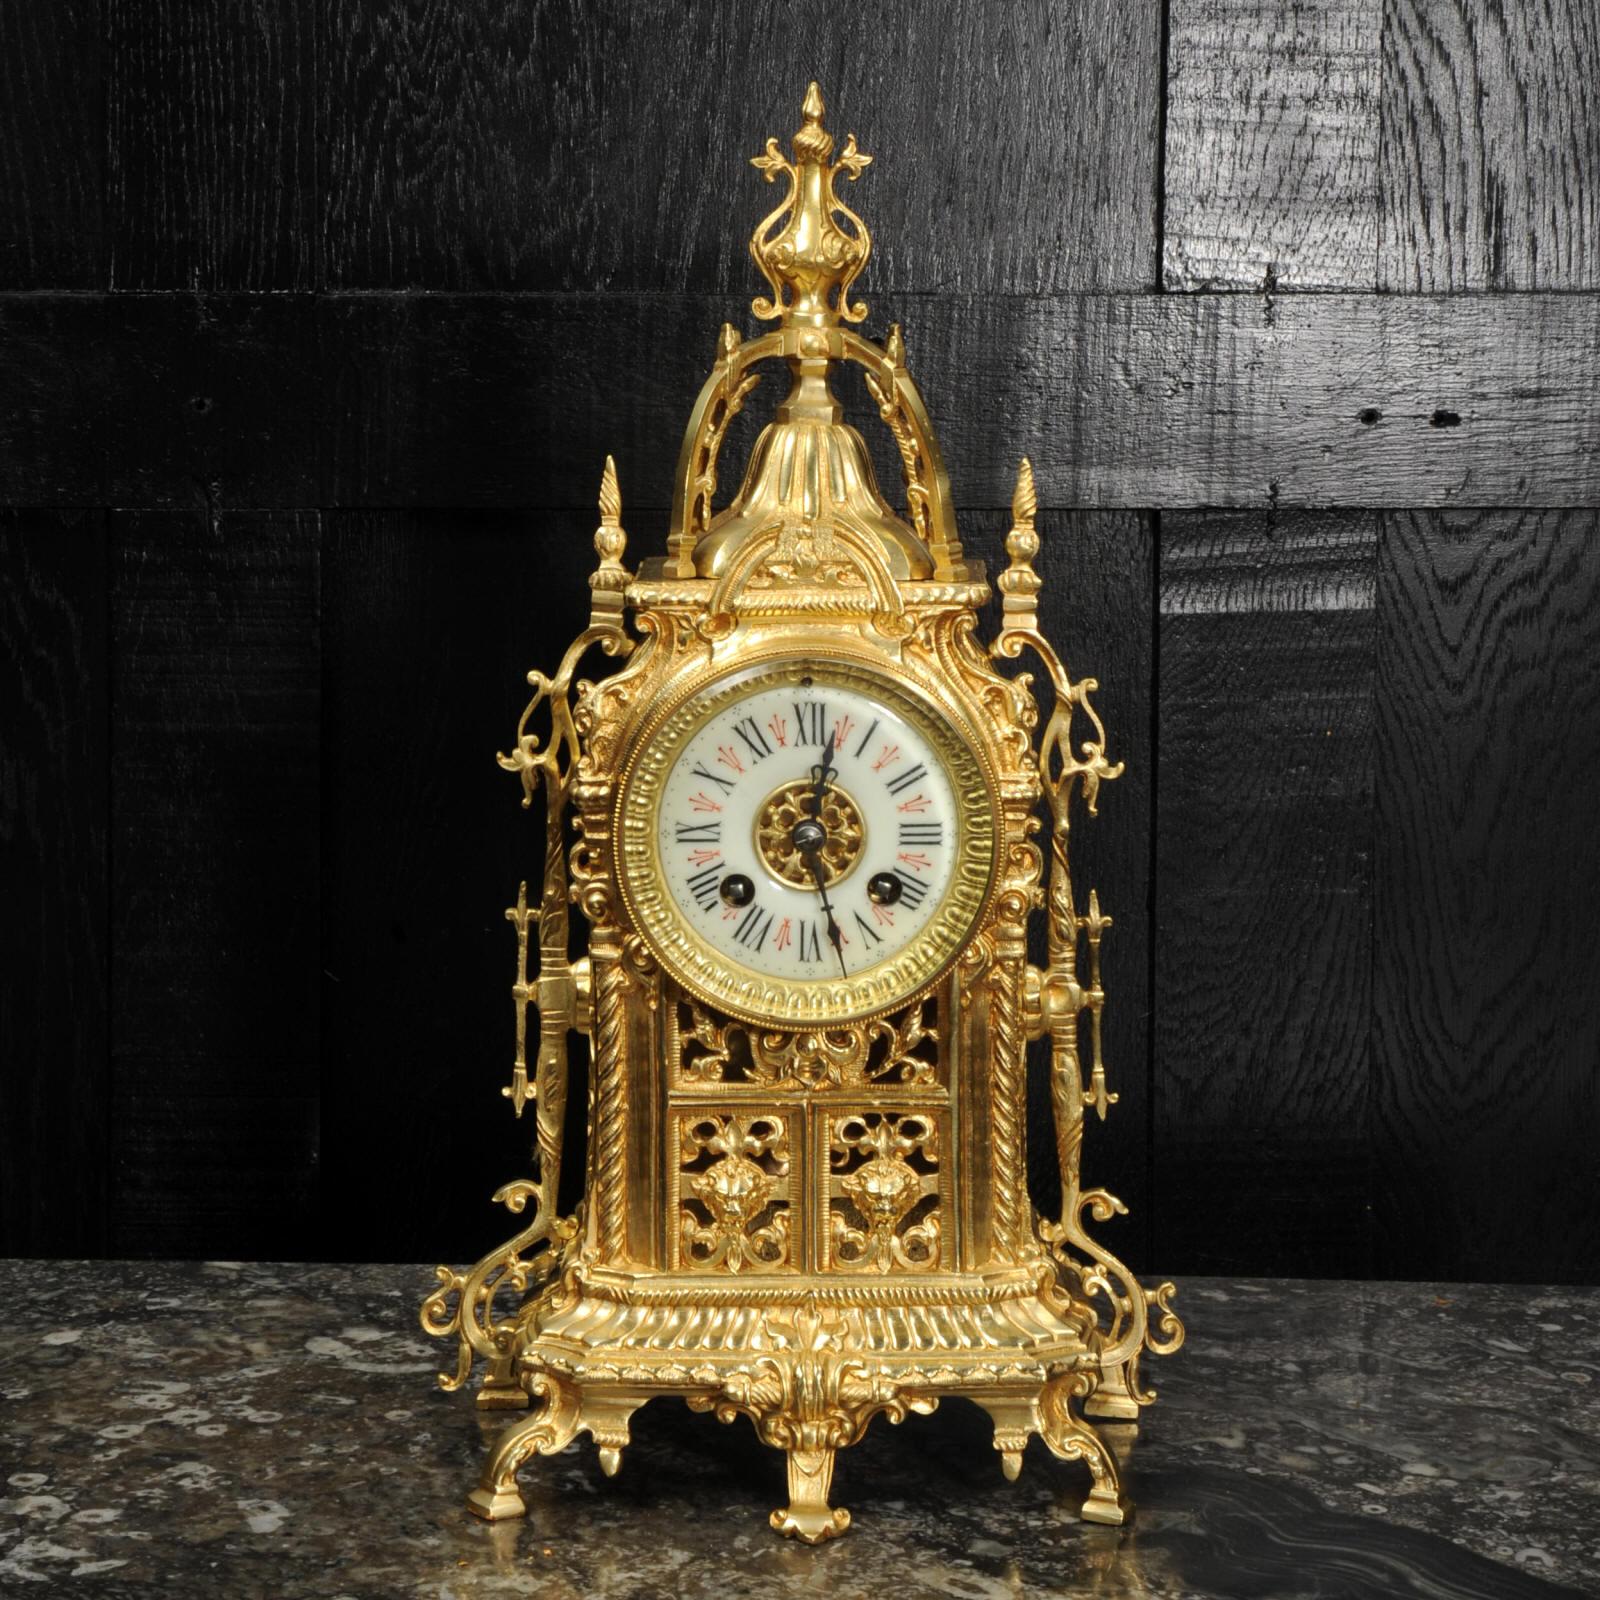 A lovely decorative Gothic clock, dating from circa 1900, by the famous bronze foundry Compagnie Des Bronzes of Molenbeek-Saint-Jean, Brussels and the movement by A D Mougin. The front is formed of a panel of pierced tracery with lions masks and